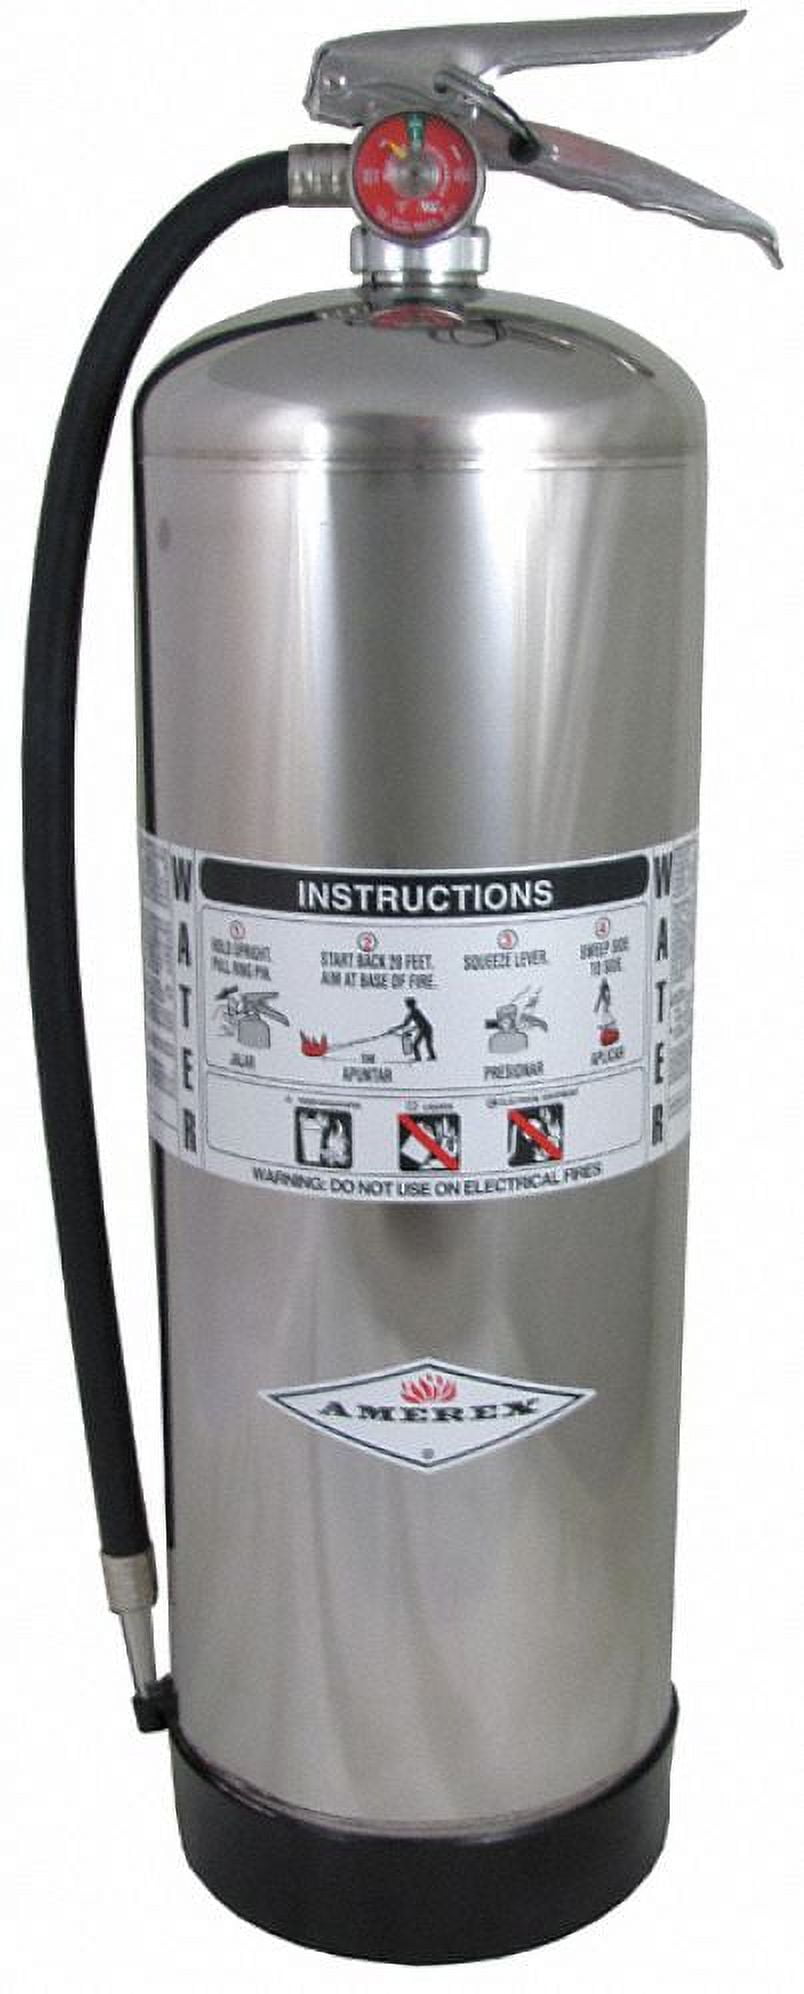 Fire extinguisher with pressurized water, 2.5 gal, type A, ULC 2A